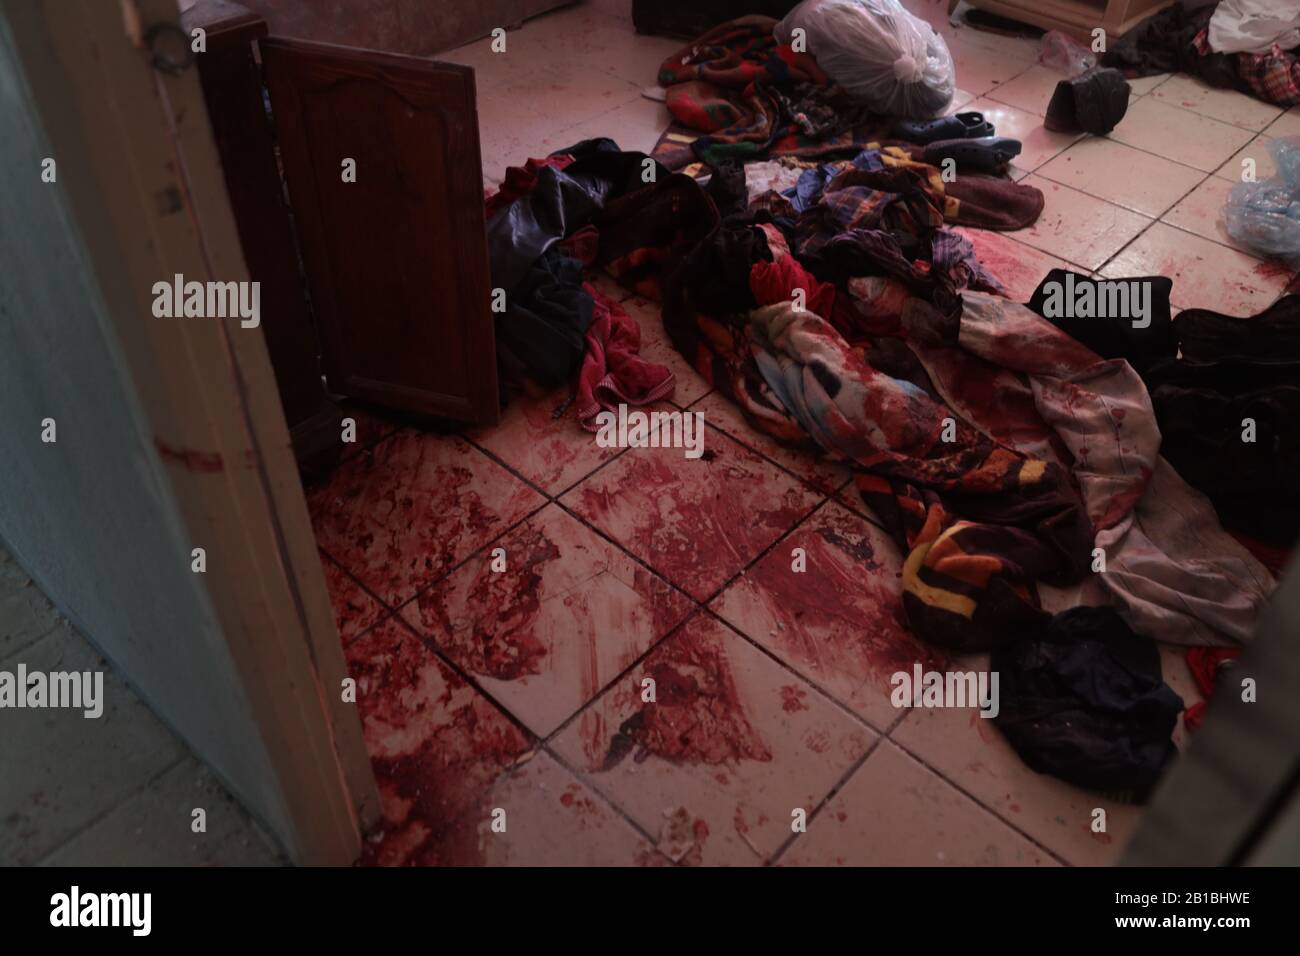 2 22 2020 Editors Note Image Contains Graphic Content Crime Scene In Ciudad Juarez Home Where Police Against Criminals Face Gunshots Six Criminals Were Killed And Two Policemen Were Injured Photo By David Peinado Pacific